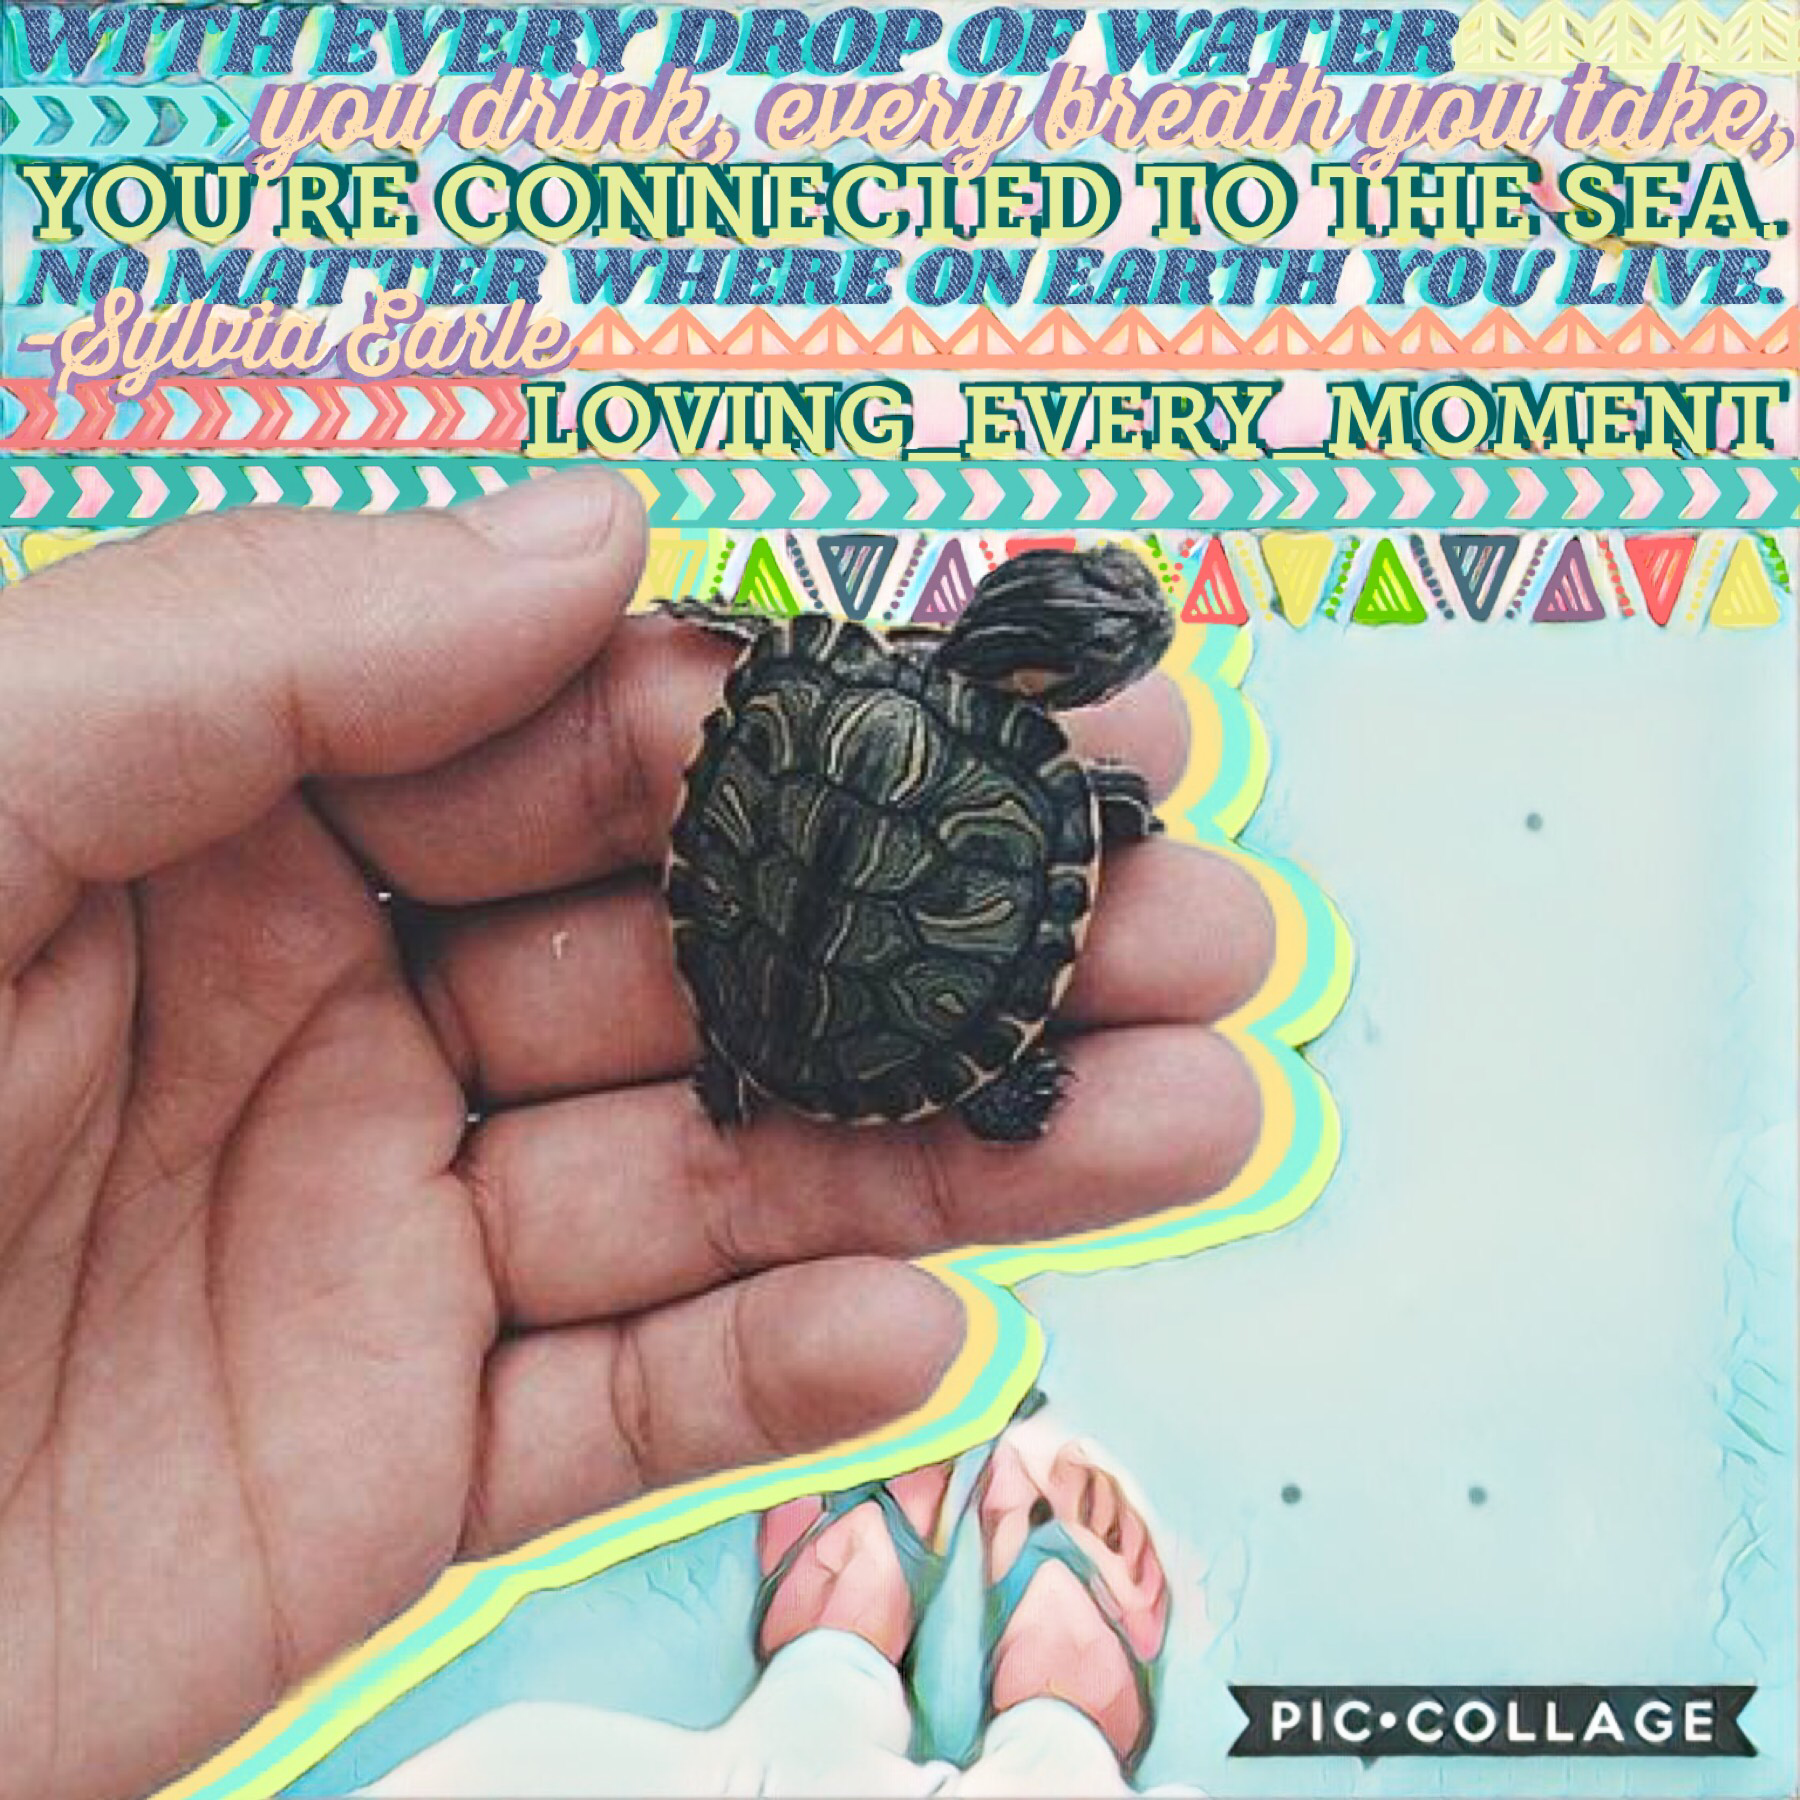 Tap
I’m gonna do a turtle theme for a little while.
Hope you love it!
QOTD: Books 📖 📚 or Movies 🎥 